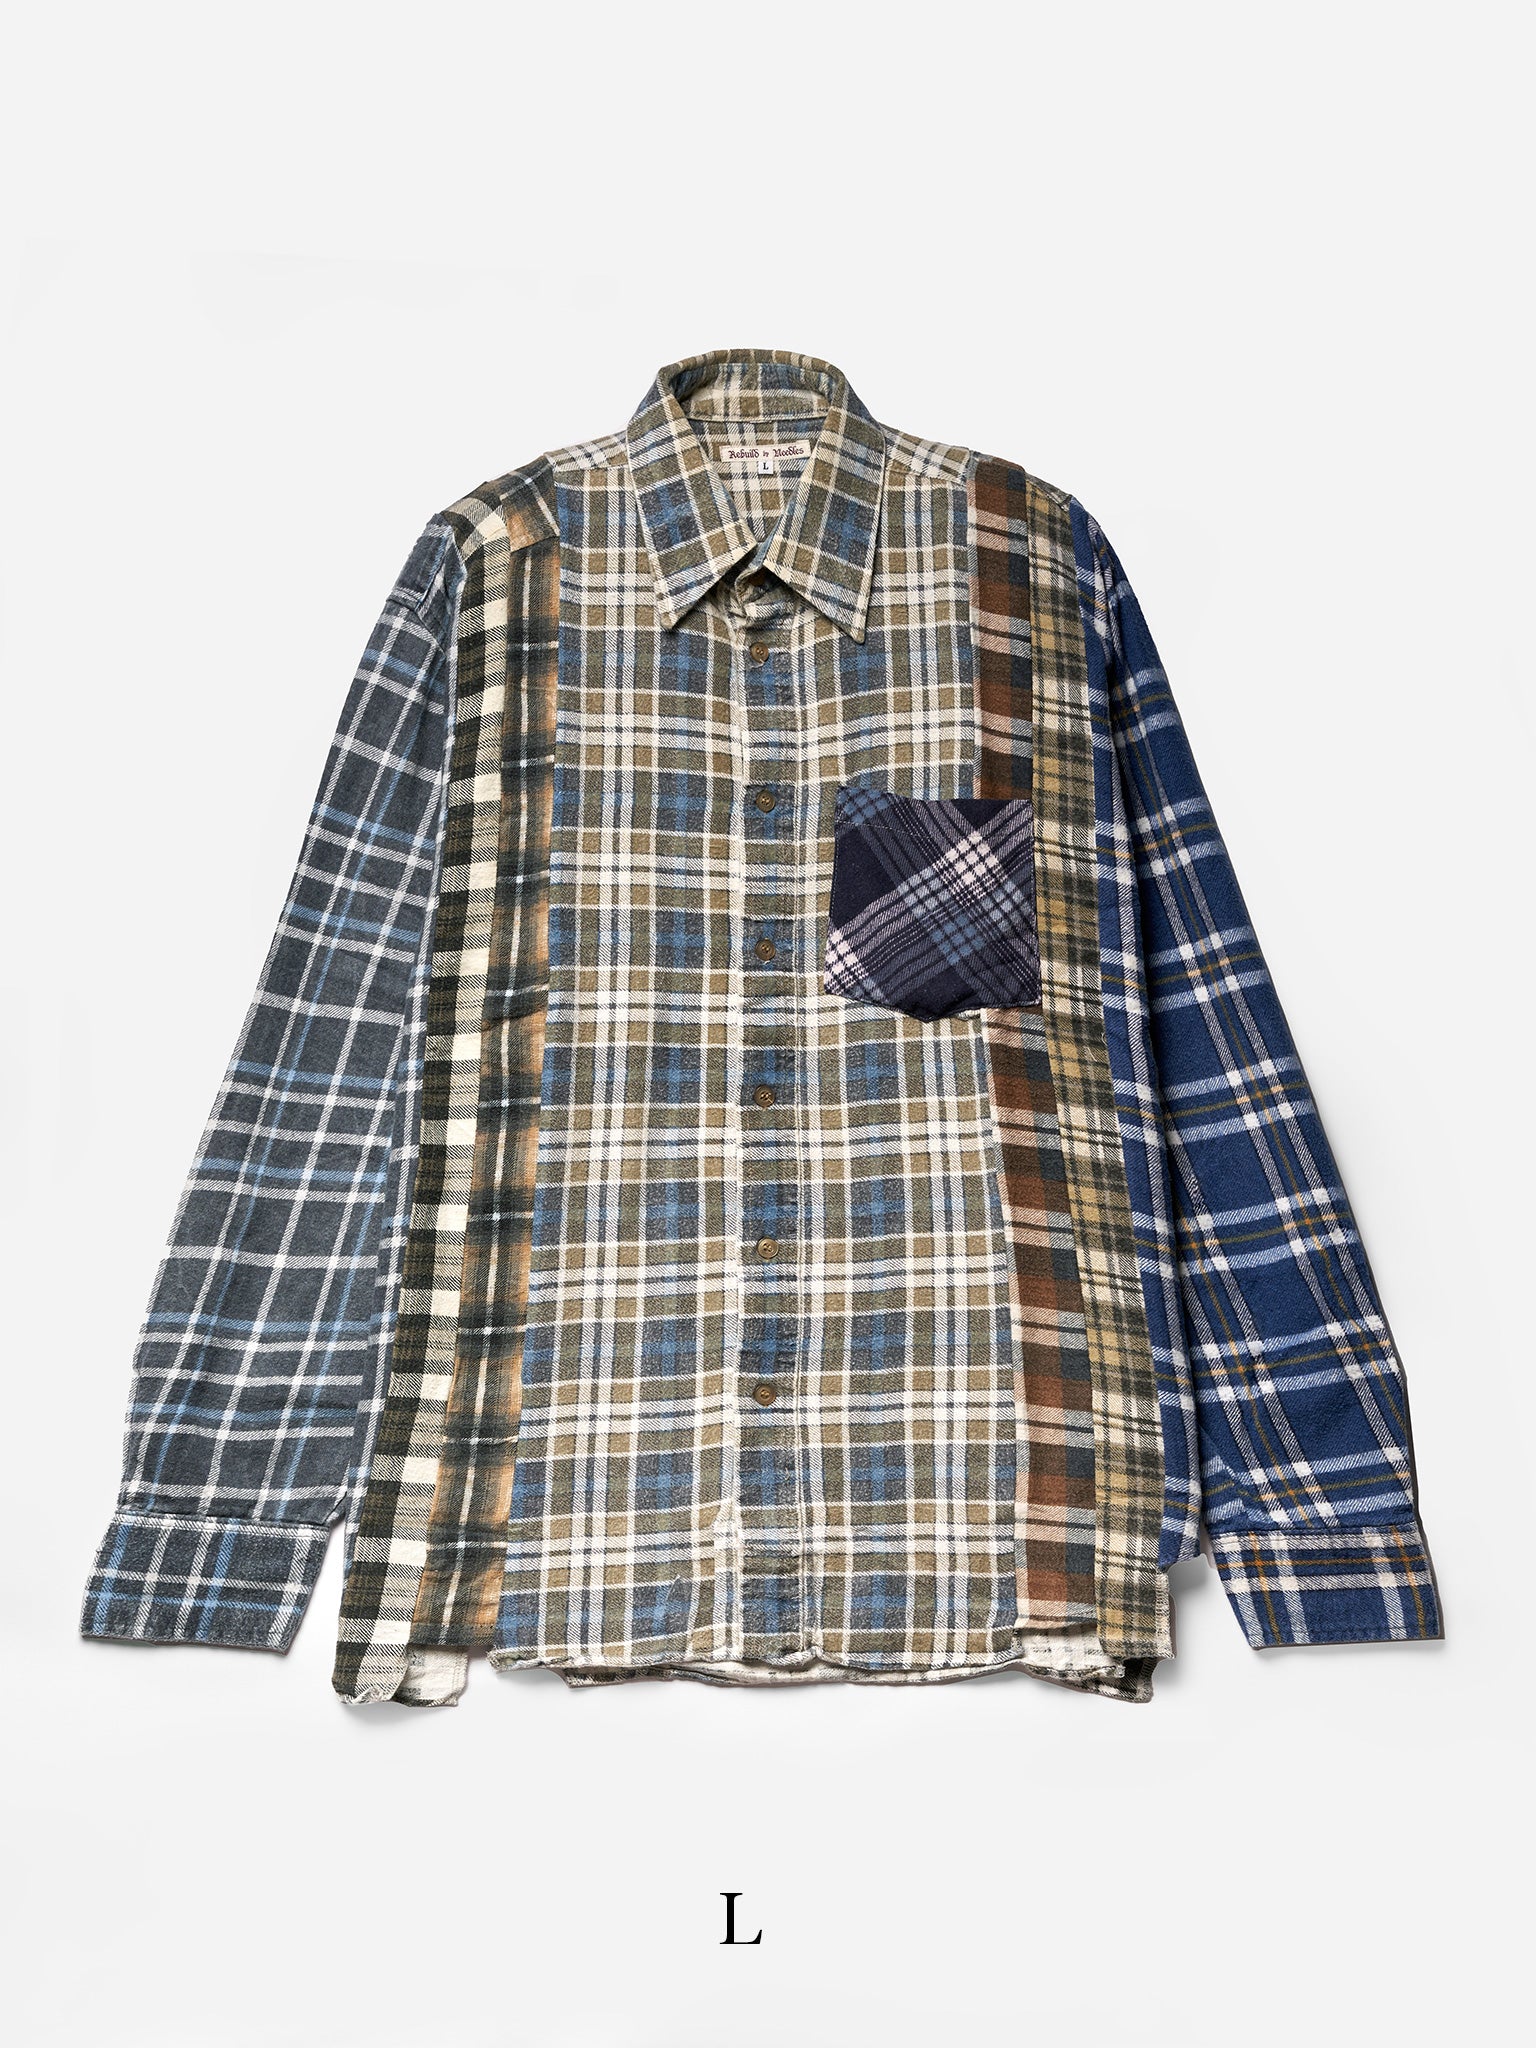 Needles Rebuild by Needles 7 Cuts Flannel Shirt